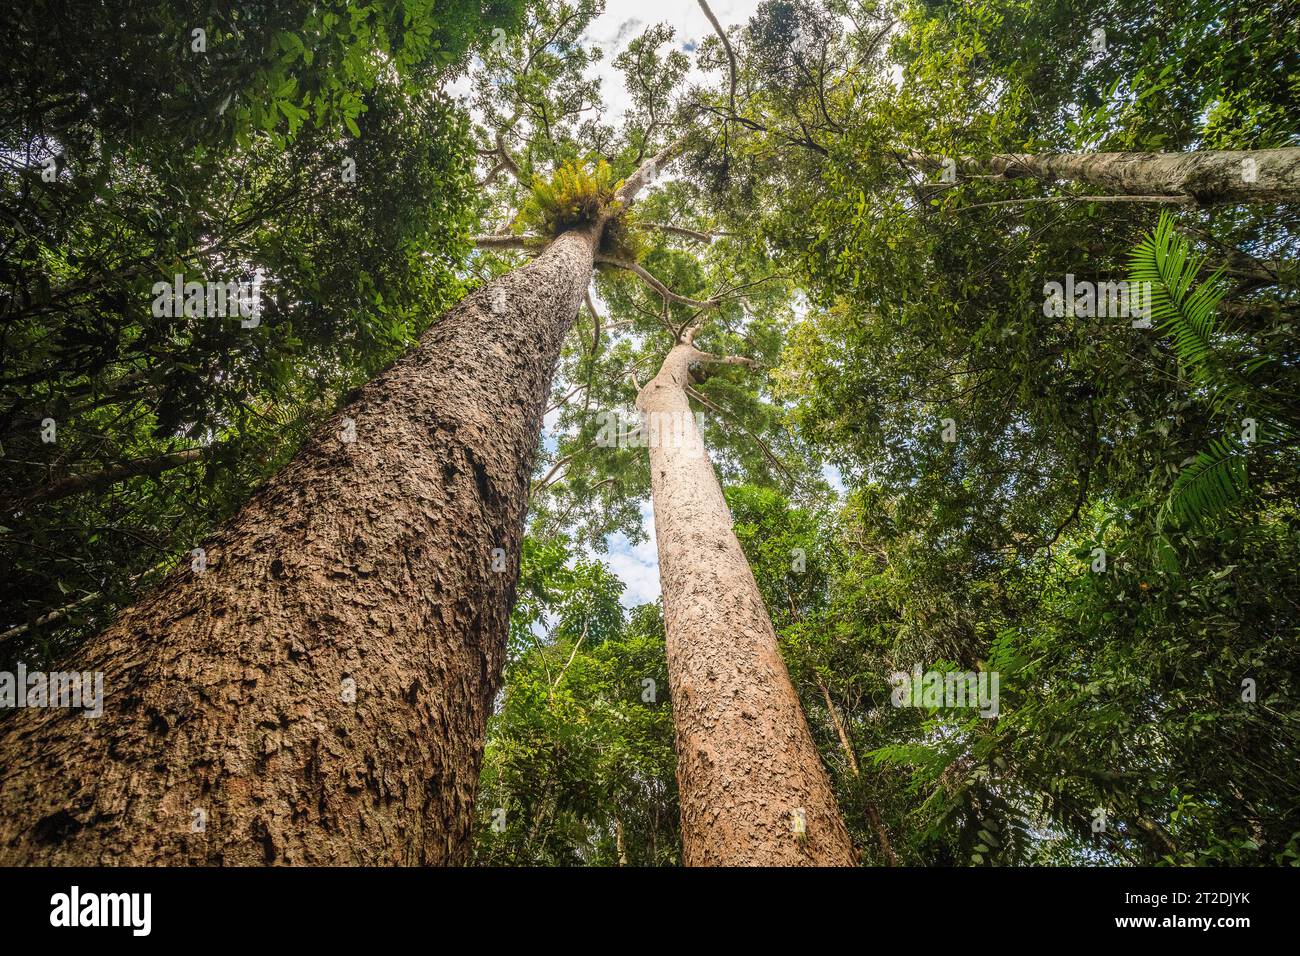 Twins Kauris - Agathis microstachya: Twin Ancient Trees in Queensland's Forests Stock Photo